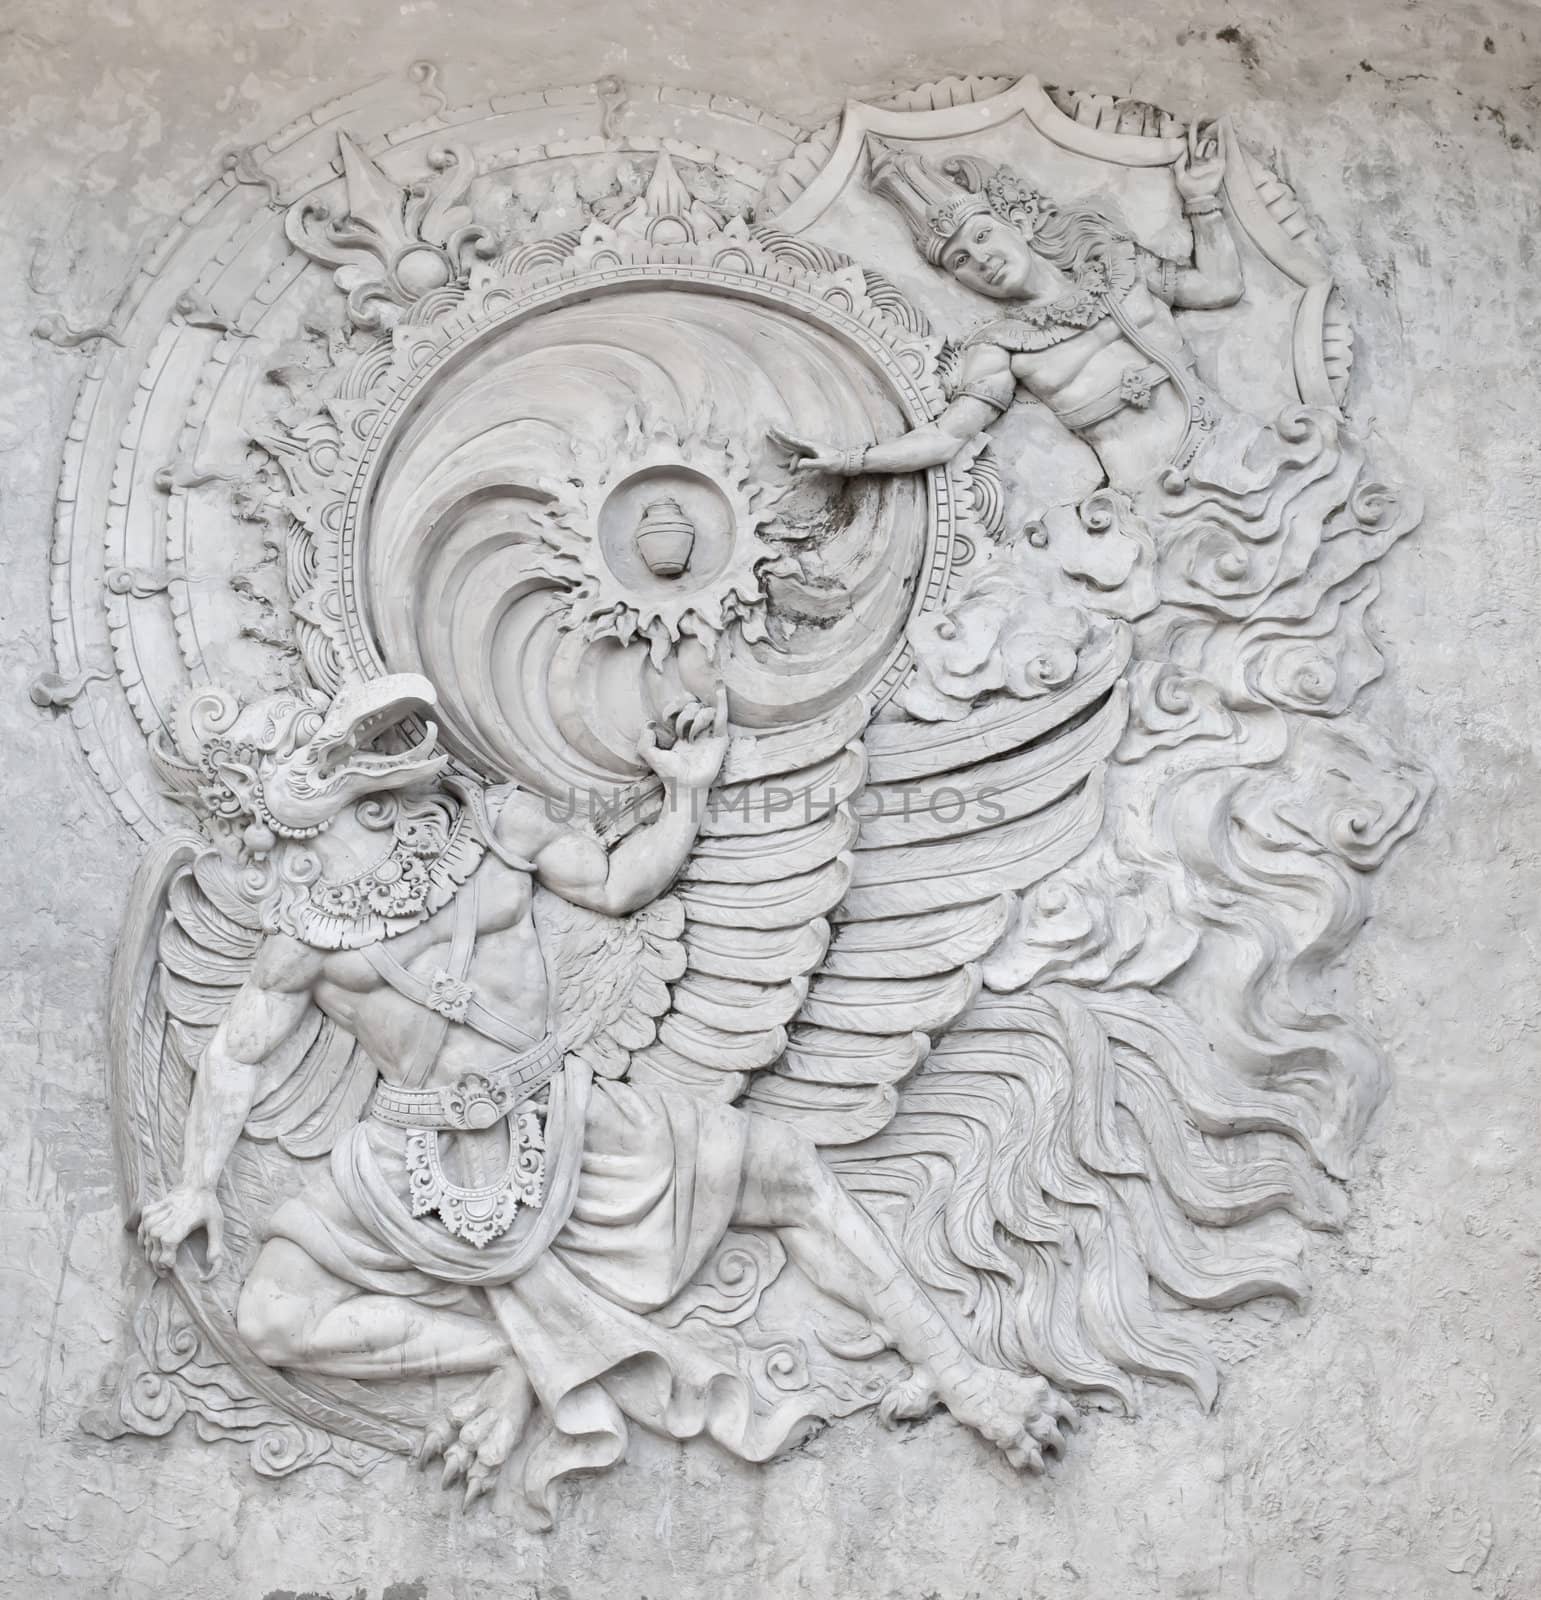 Detail of carved stone at in Bali, Indonesia